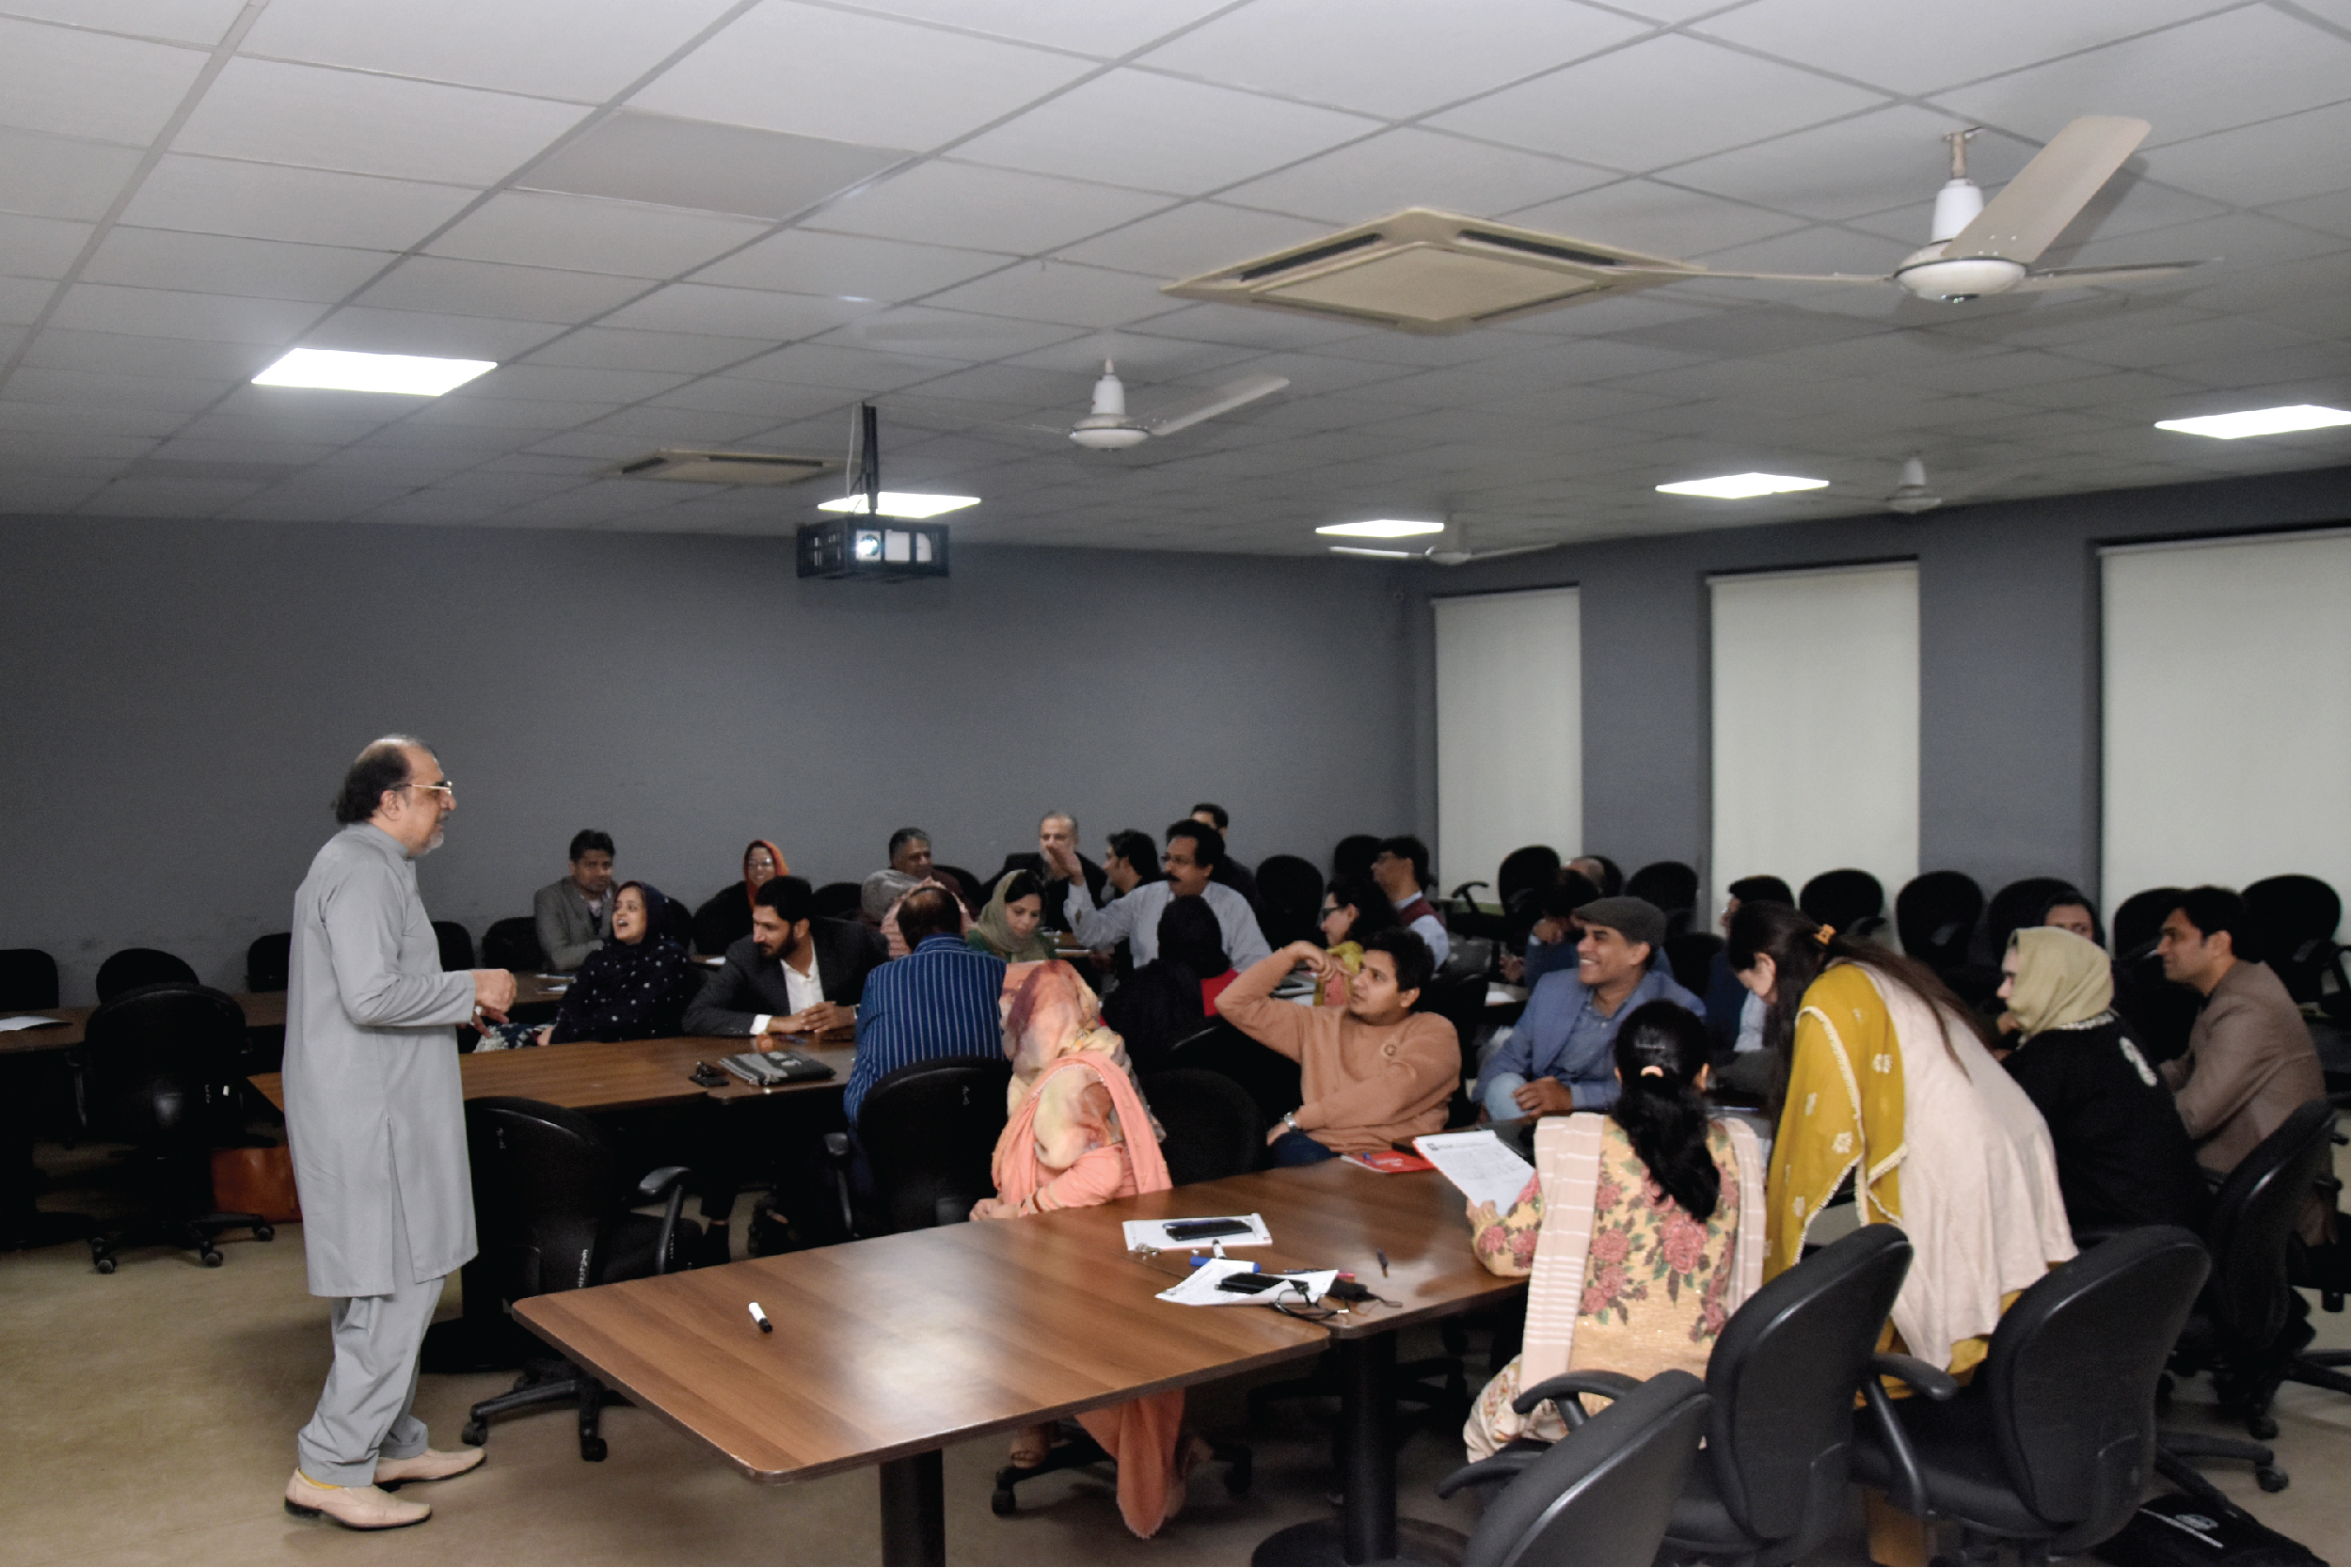 Faculty Training on Assurance of Learning (AOL) by Dr. Naveed Yazdani, Dean at HSM